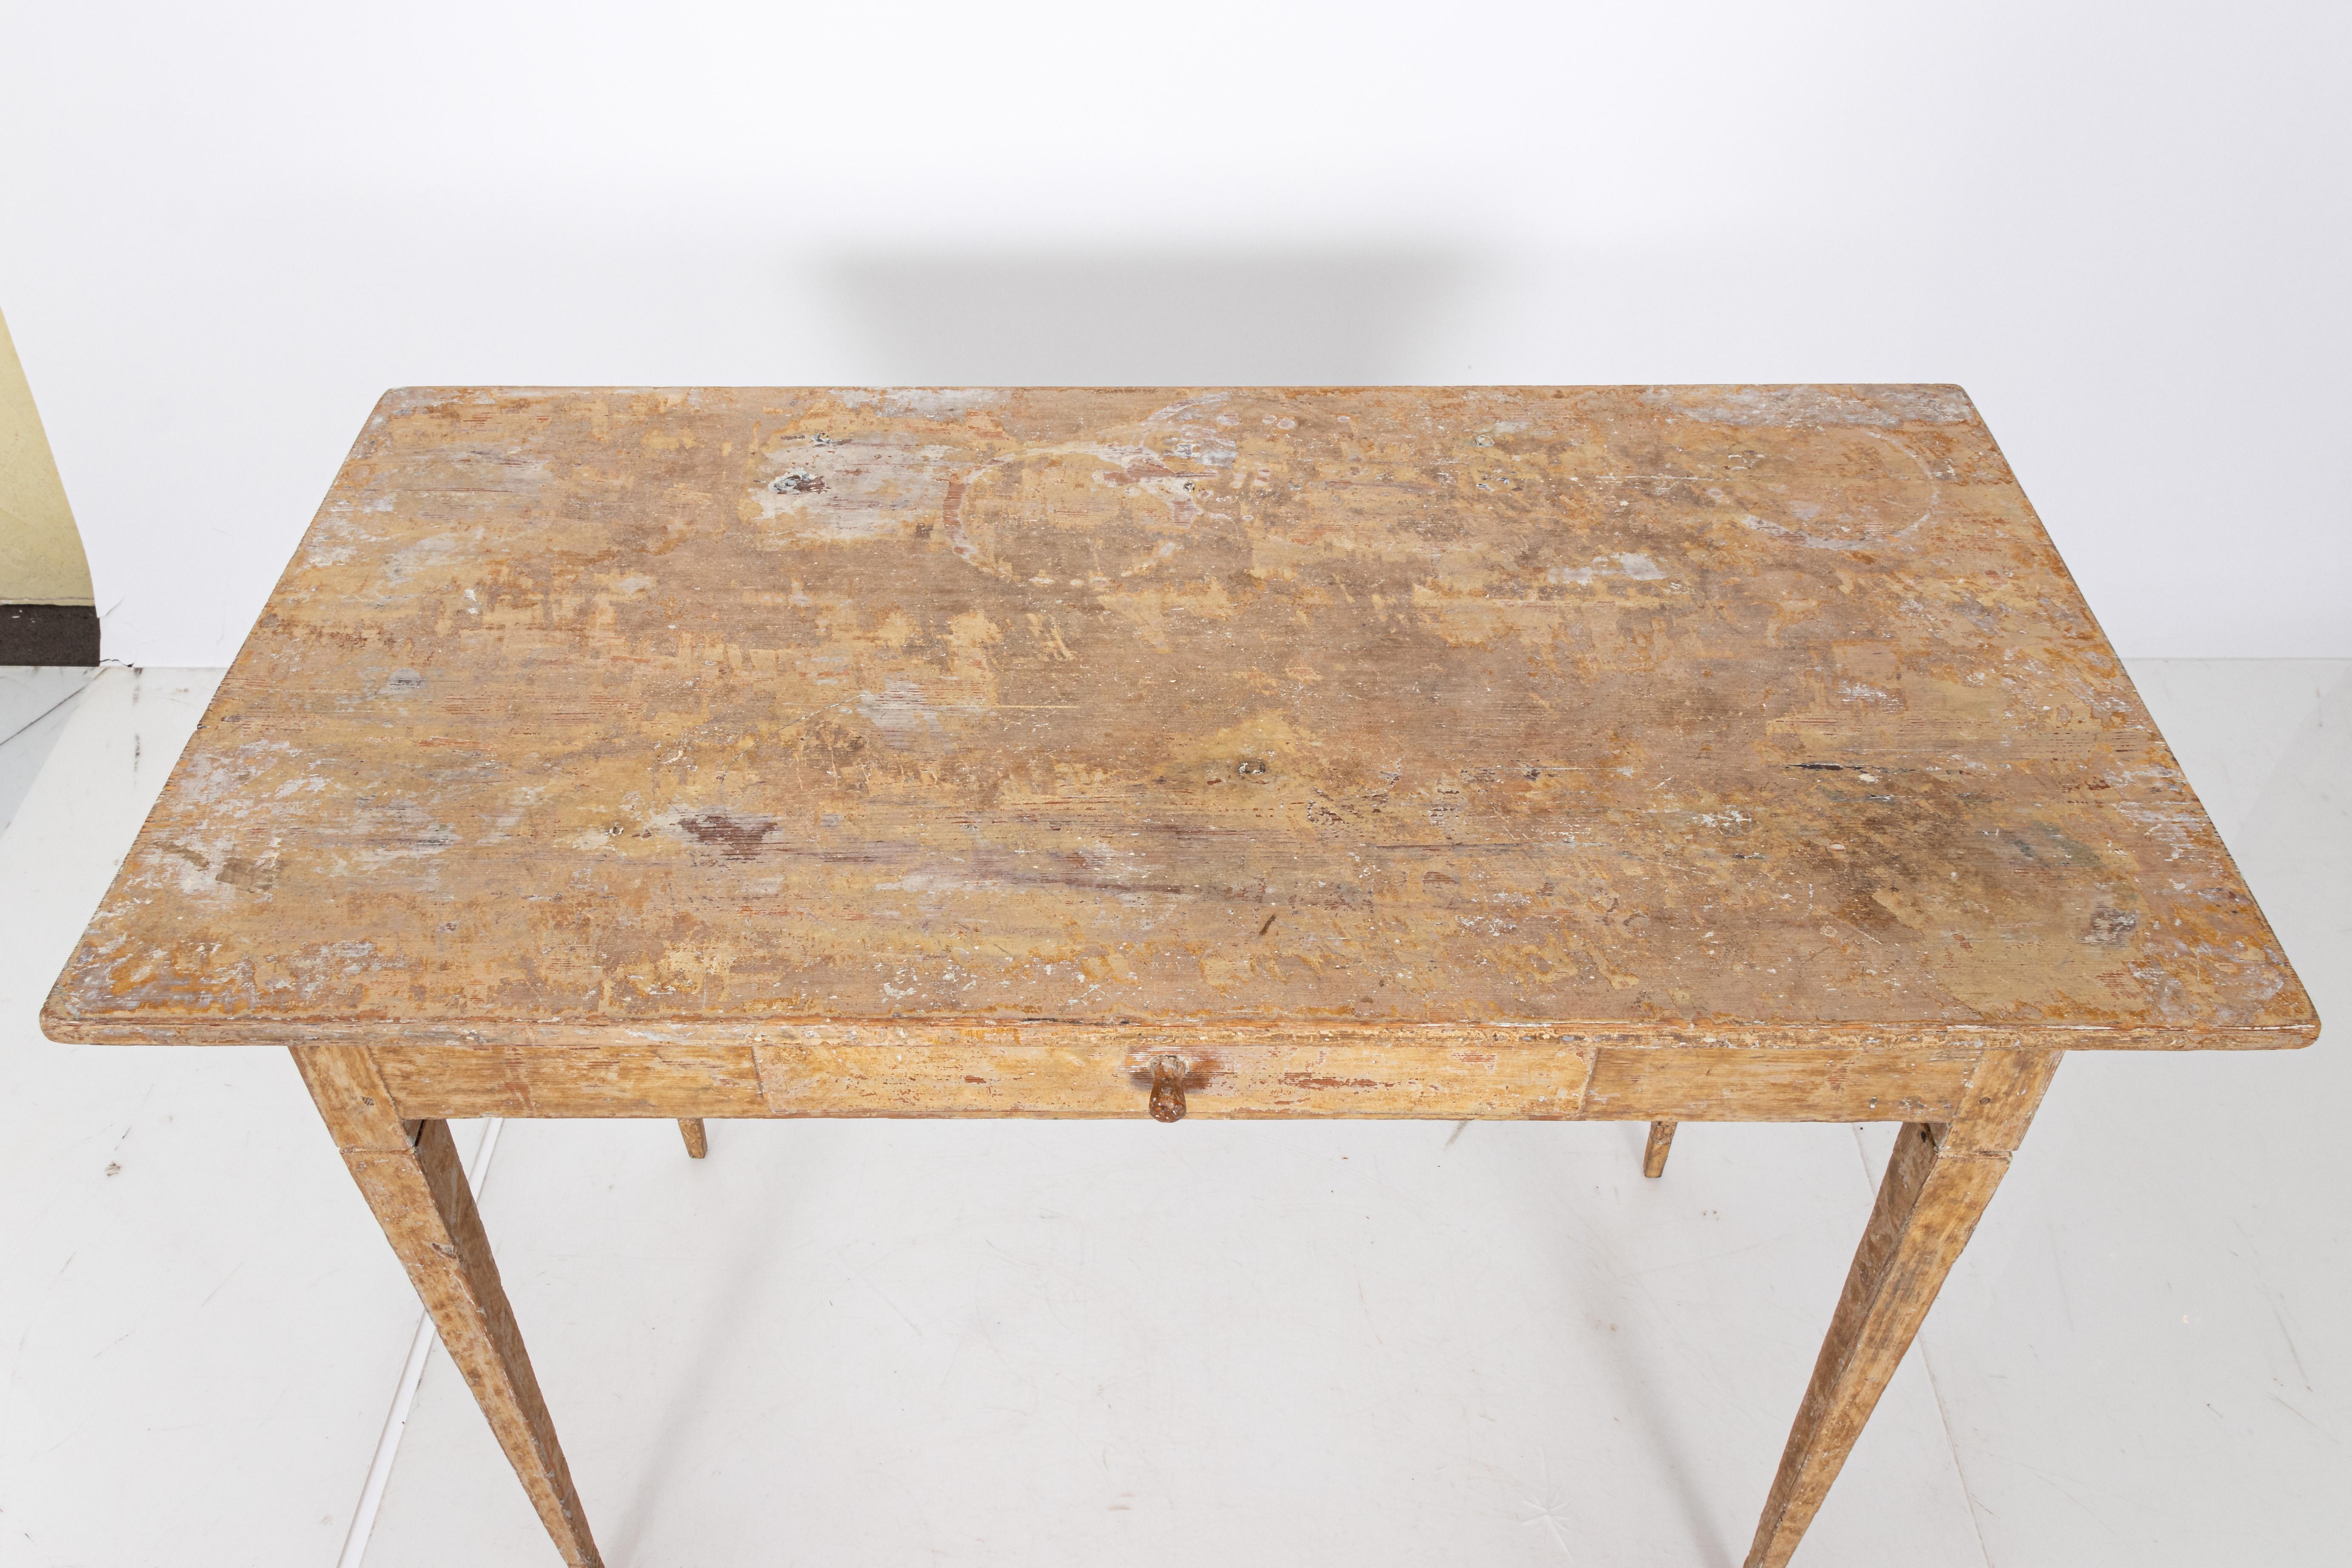 18th Century Antique Gustavian Style Writing Desk with Dry Scraped Finish